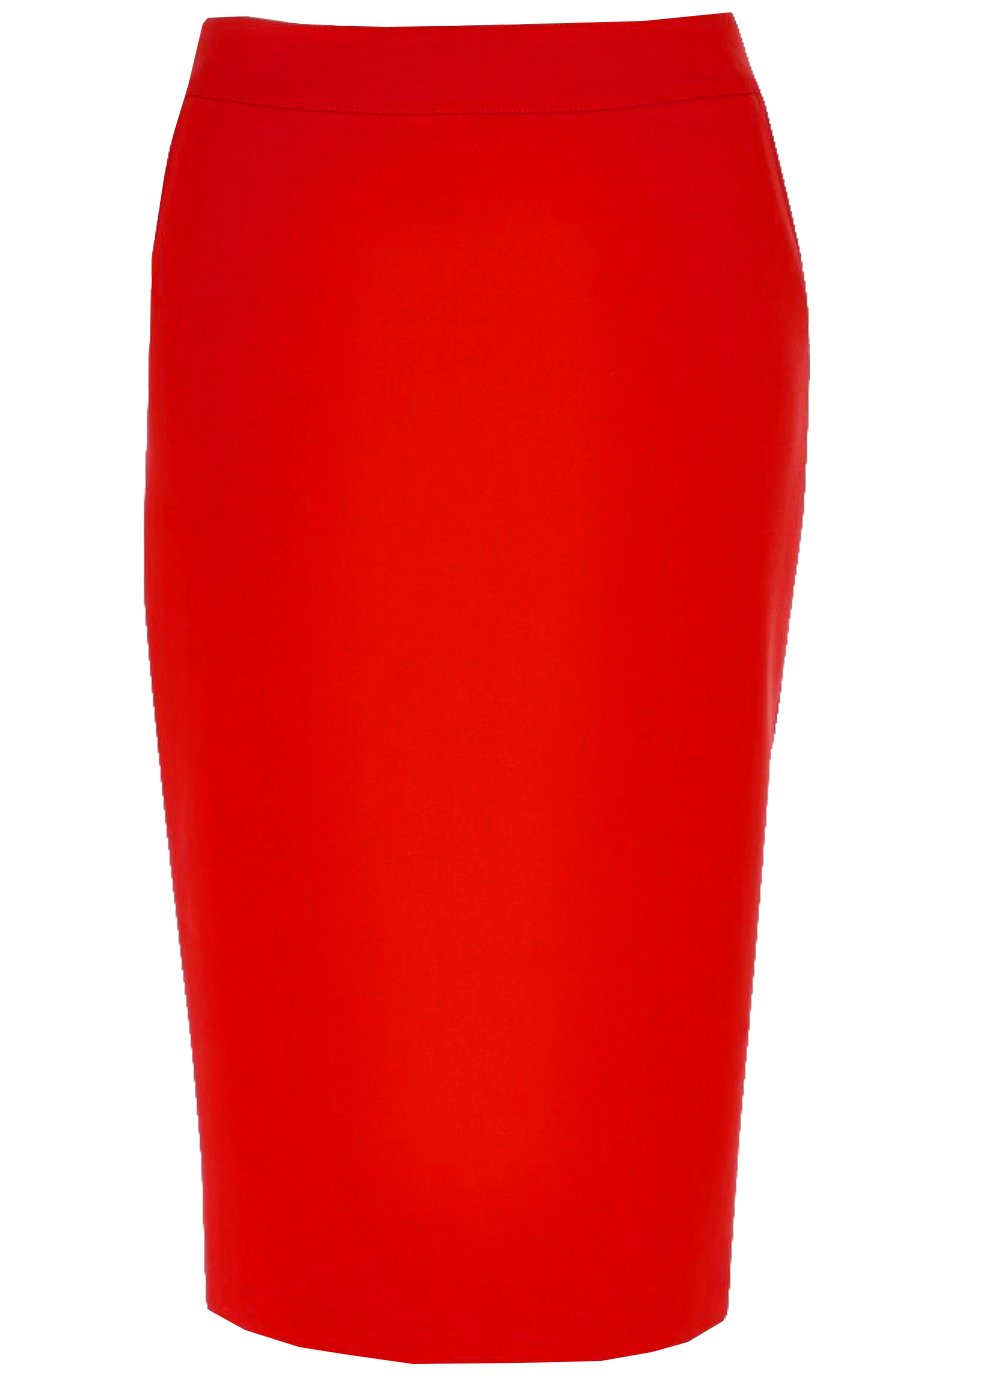 Red Skirt Plus Size 54